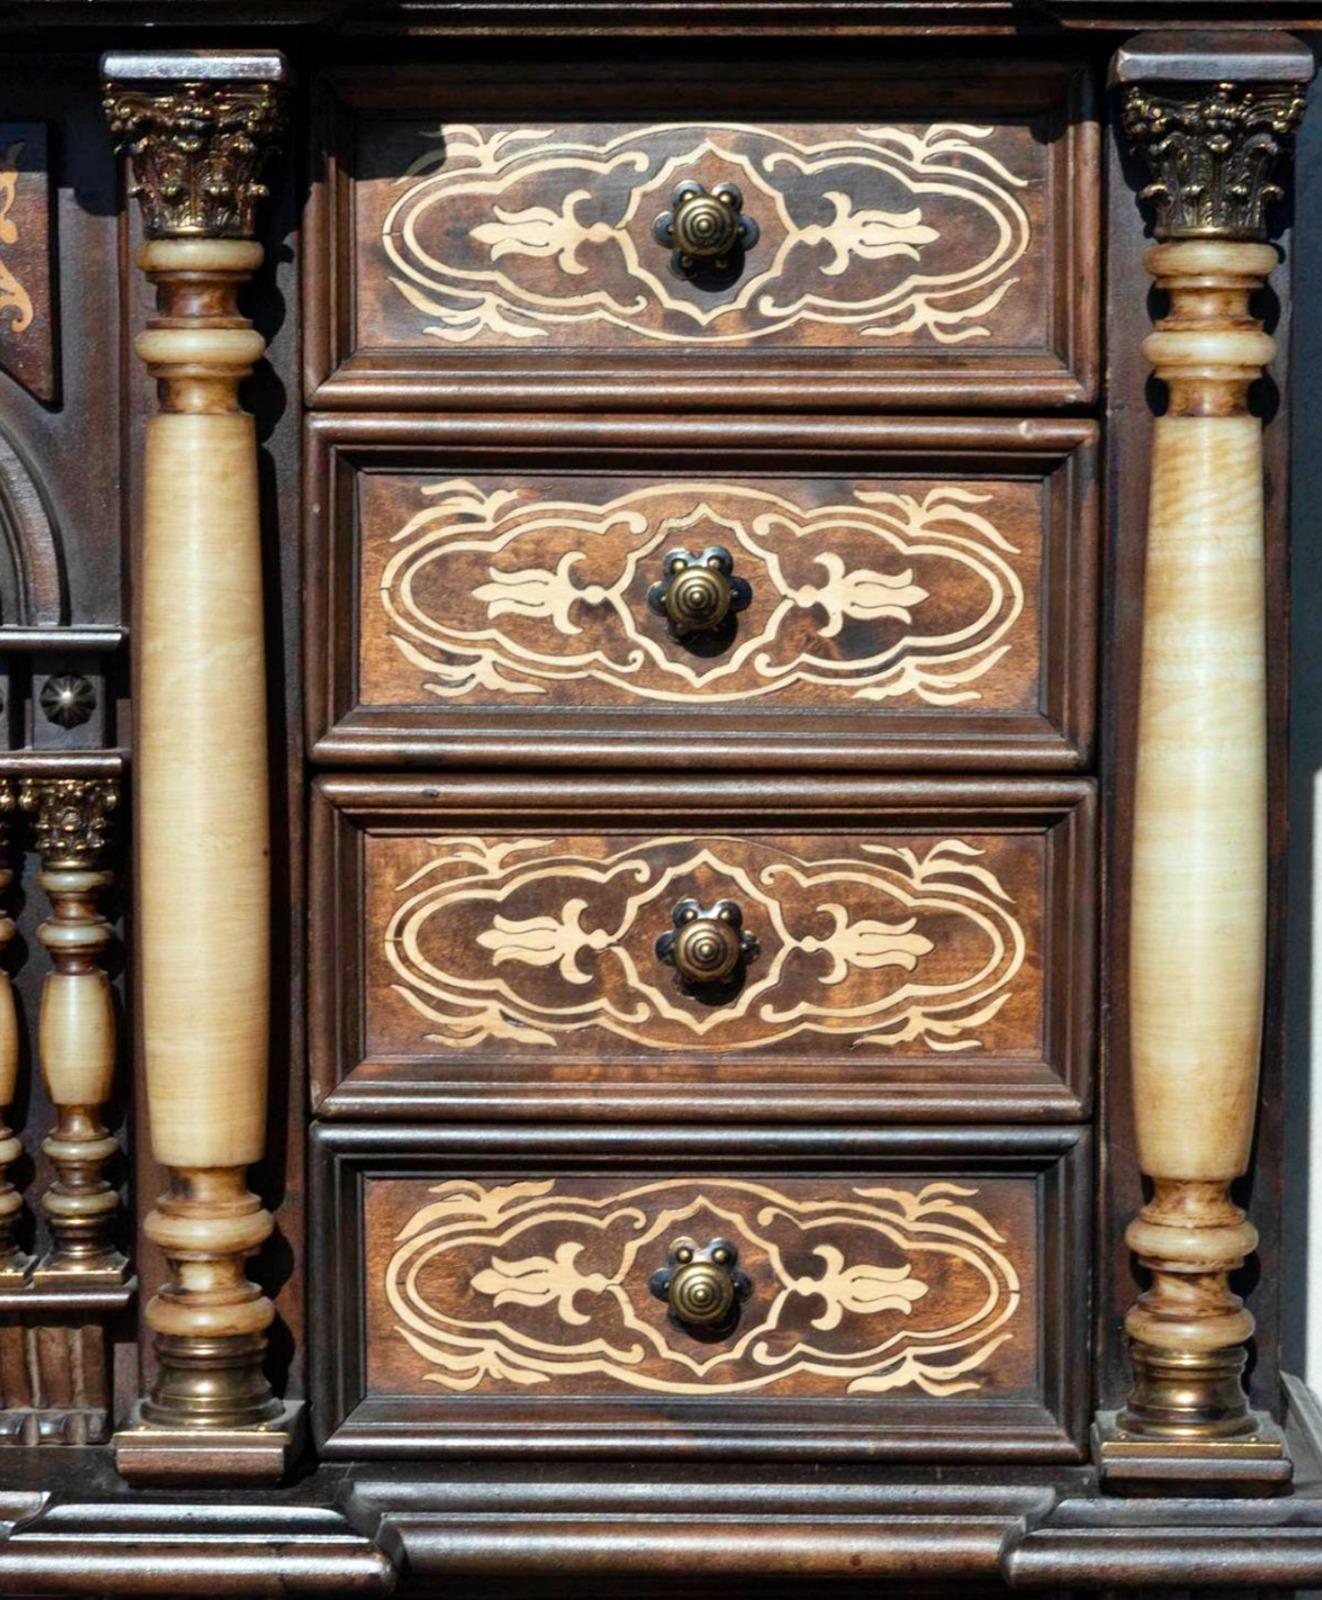 Great Pair of Spanish (Toledo ) Bargueño Cabinets 19th Century
 in walnut wood, alabaster and carved bone inlay, Toledo work from the late 19th century

In noble chestnut and walnut wood. Measurements of each bargueño: 135 x 137 x 32 cm.